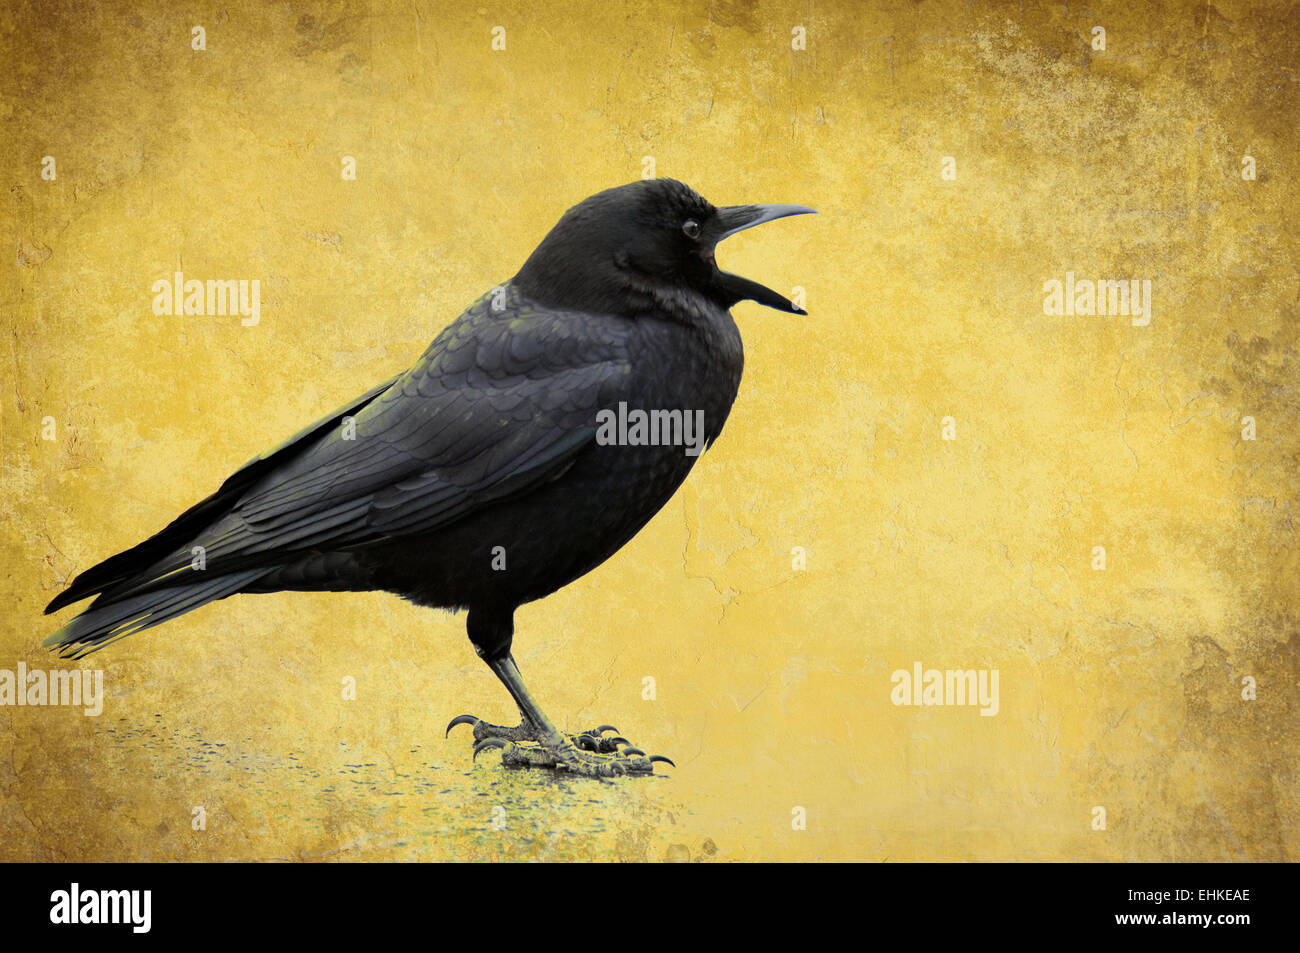 Textured Image of an American Crow Calling Stock Photo